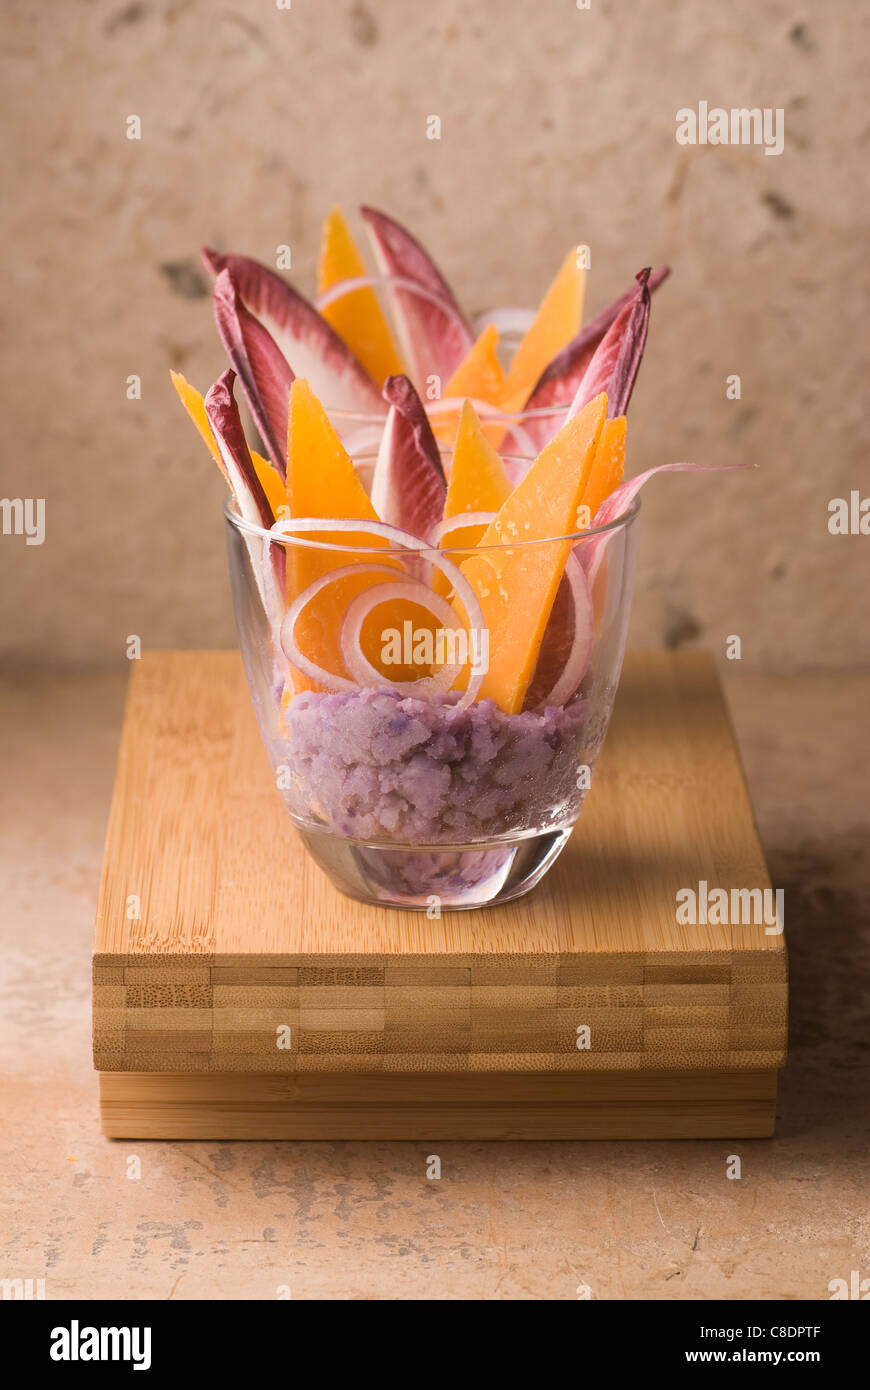 Cream of Vitelotte potatoes with red chicory leaves and thin slices of Mimolette Stock Photo